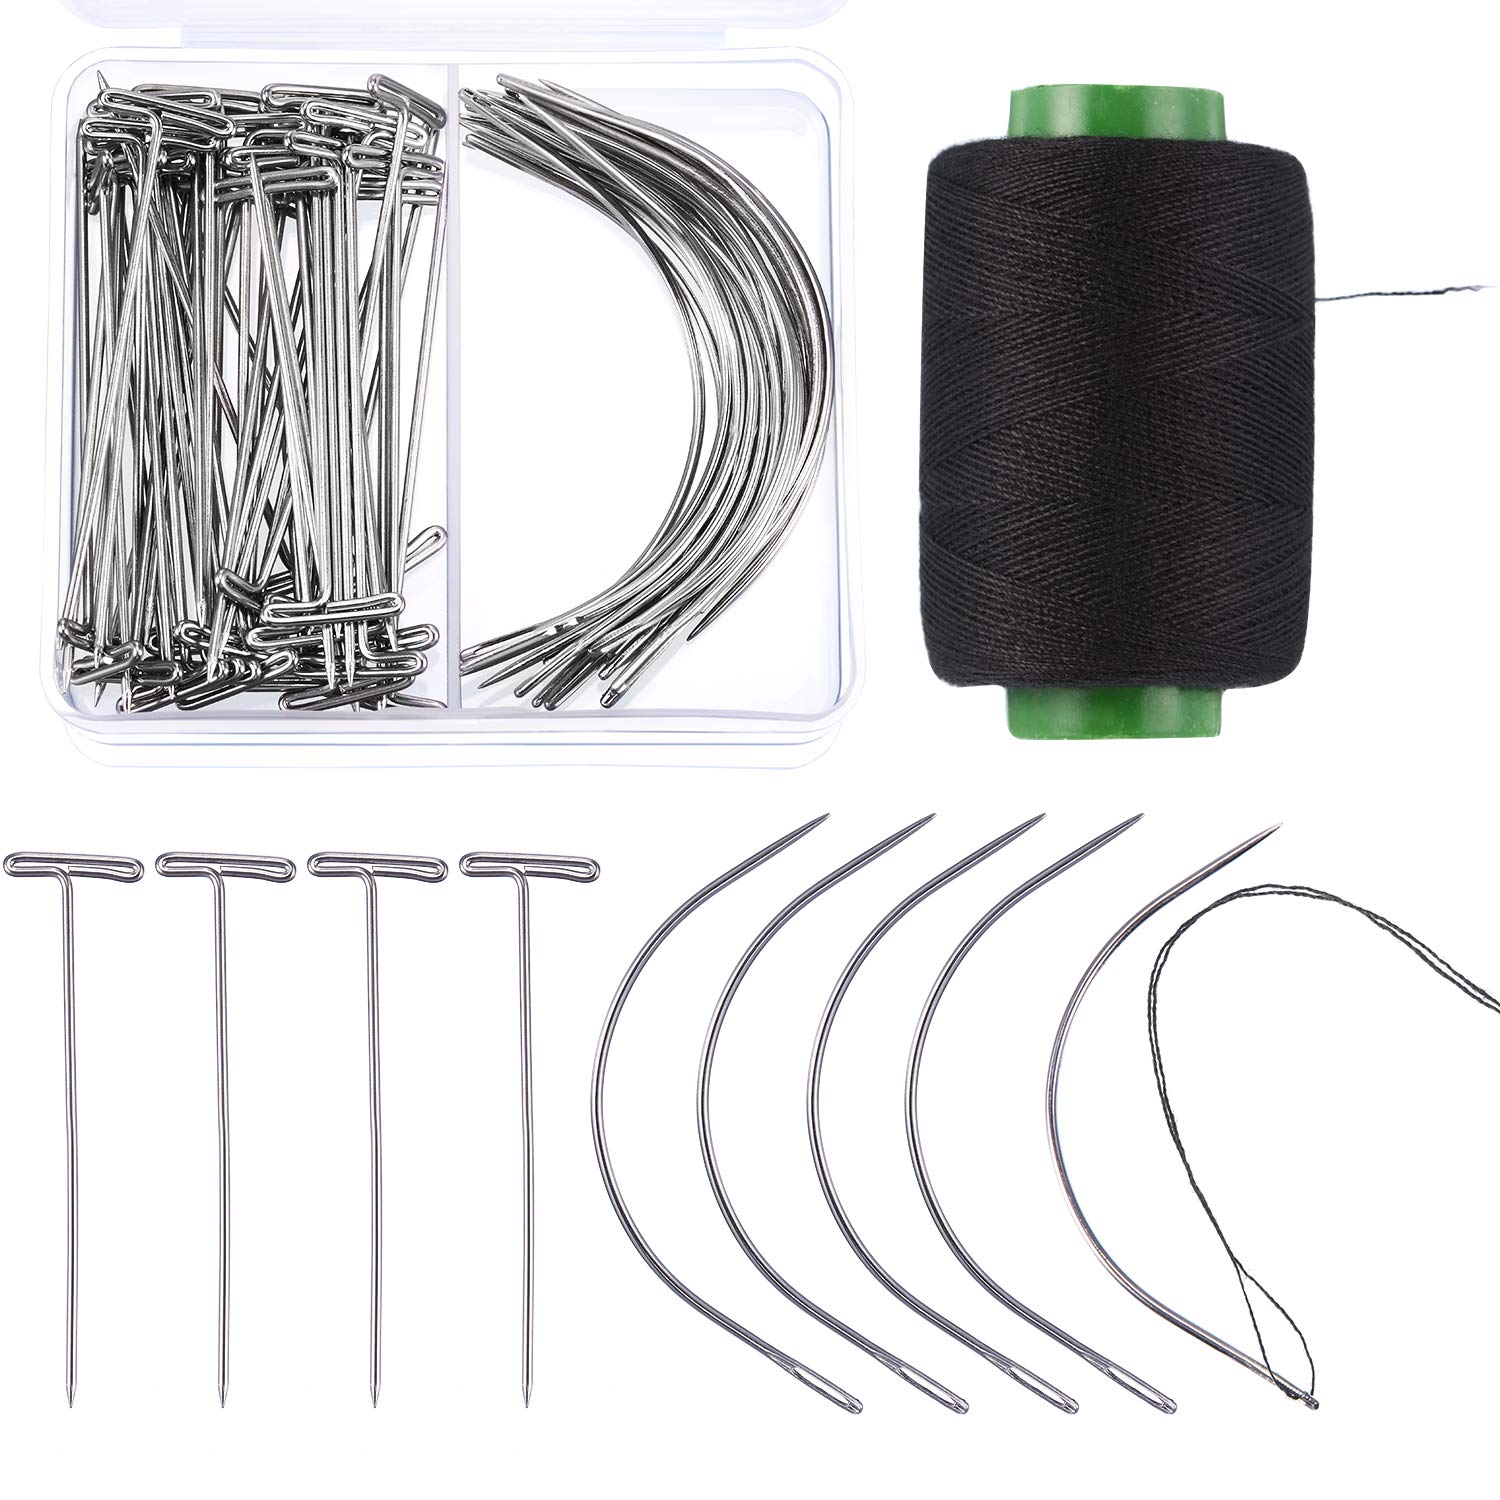 T Pins C Curved Wig Sewing Cord For Holing Wigs Sew In Hair Weave Needles  For Wig Making Blocking Knitting Modelling And Crafts